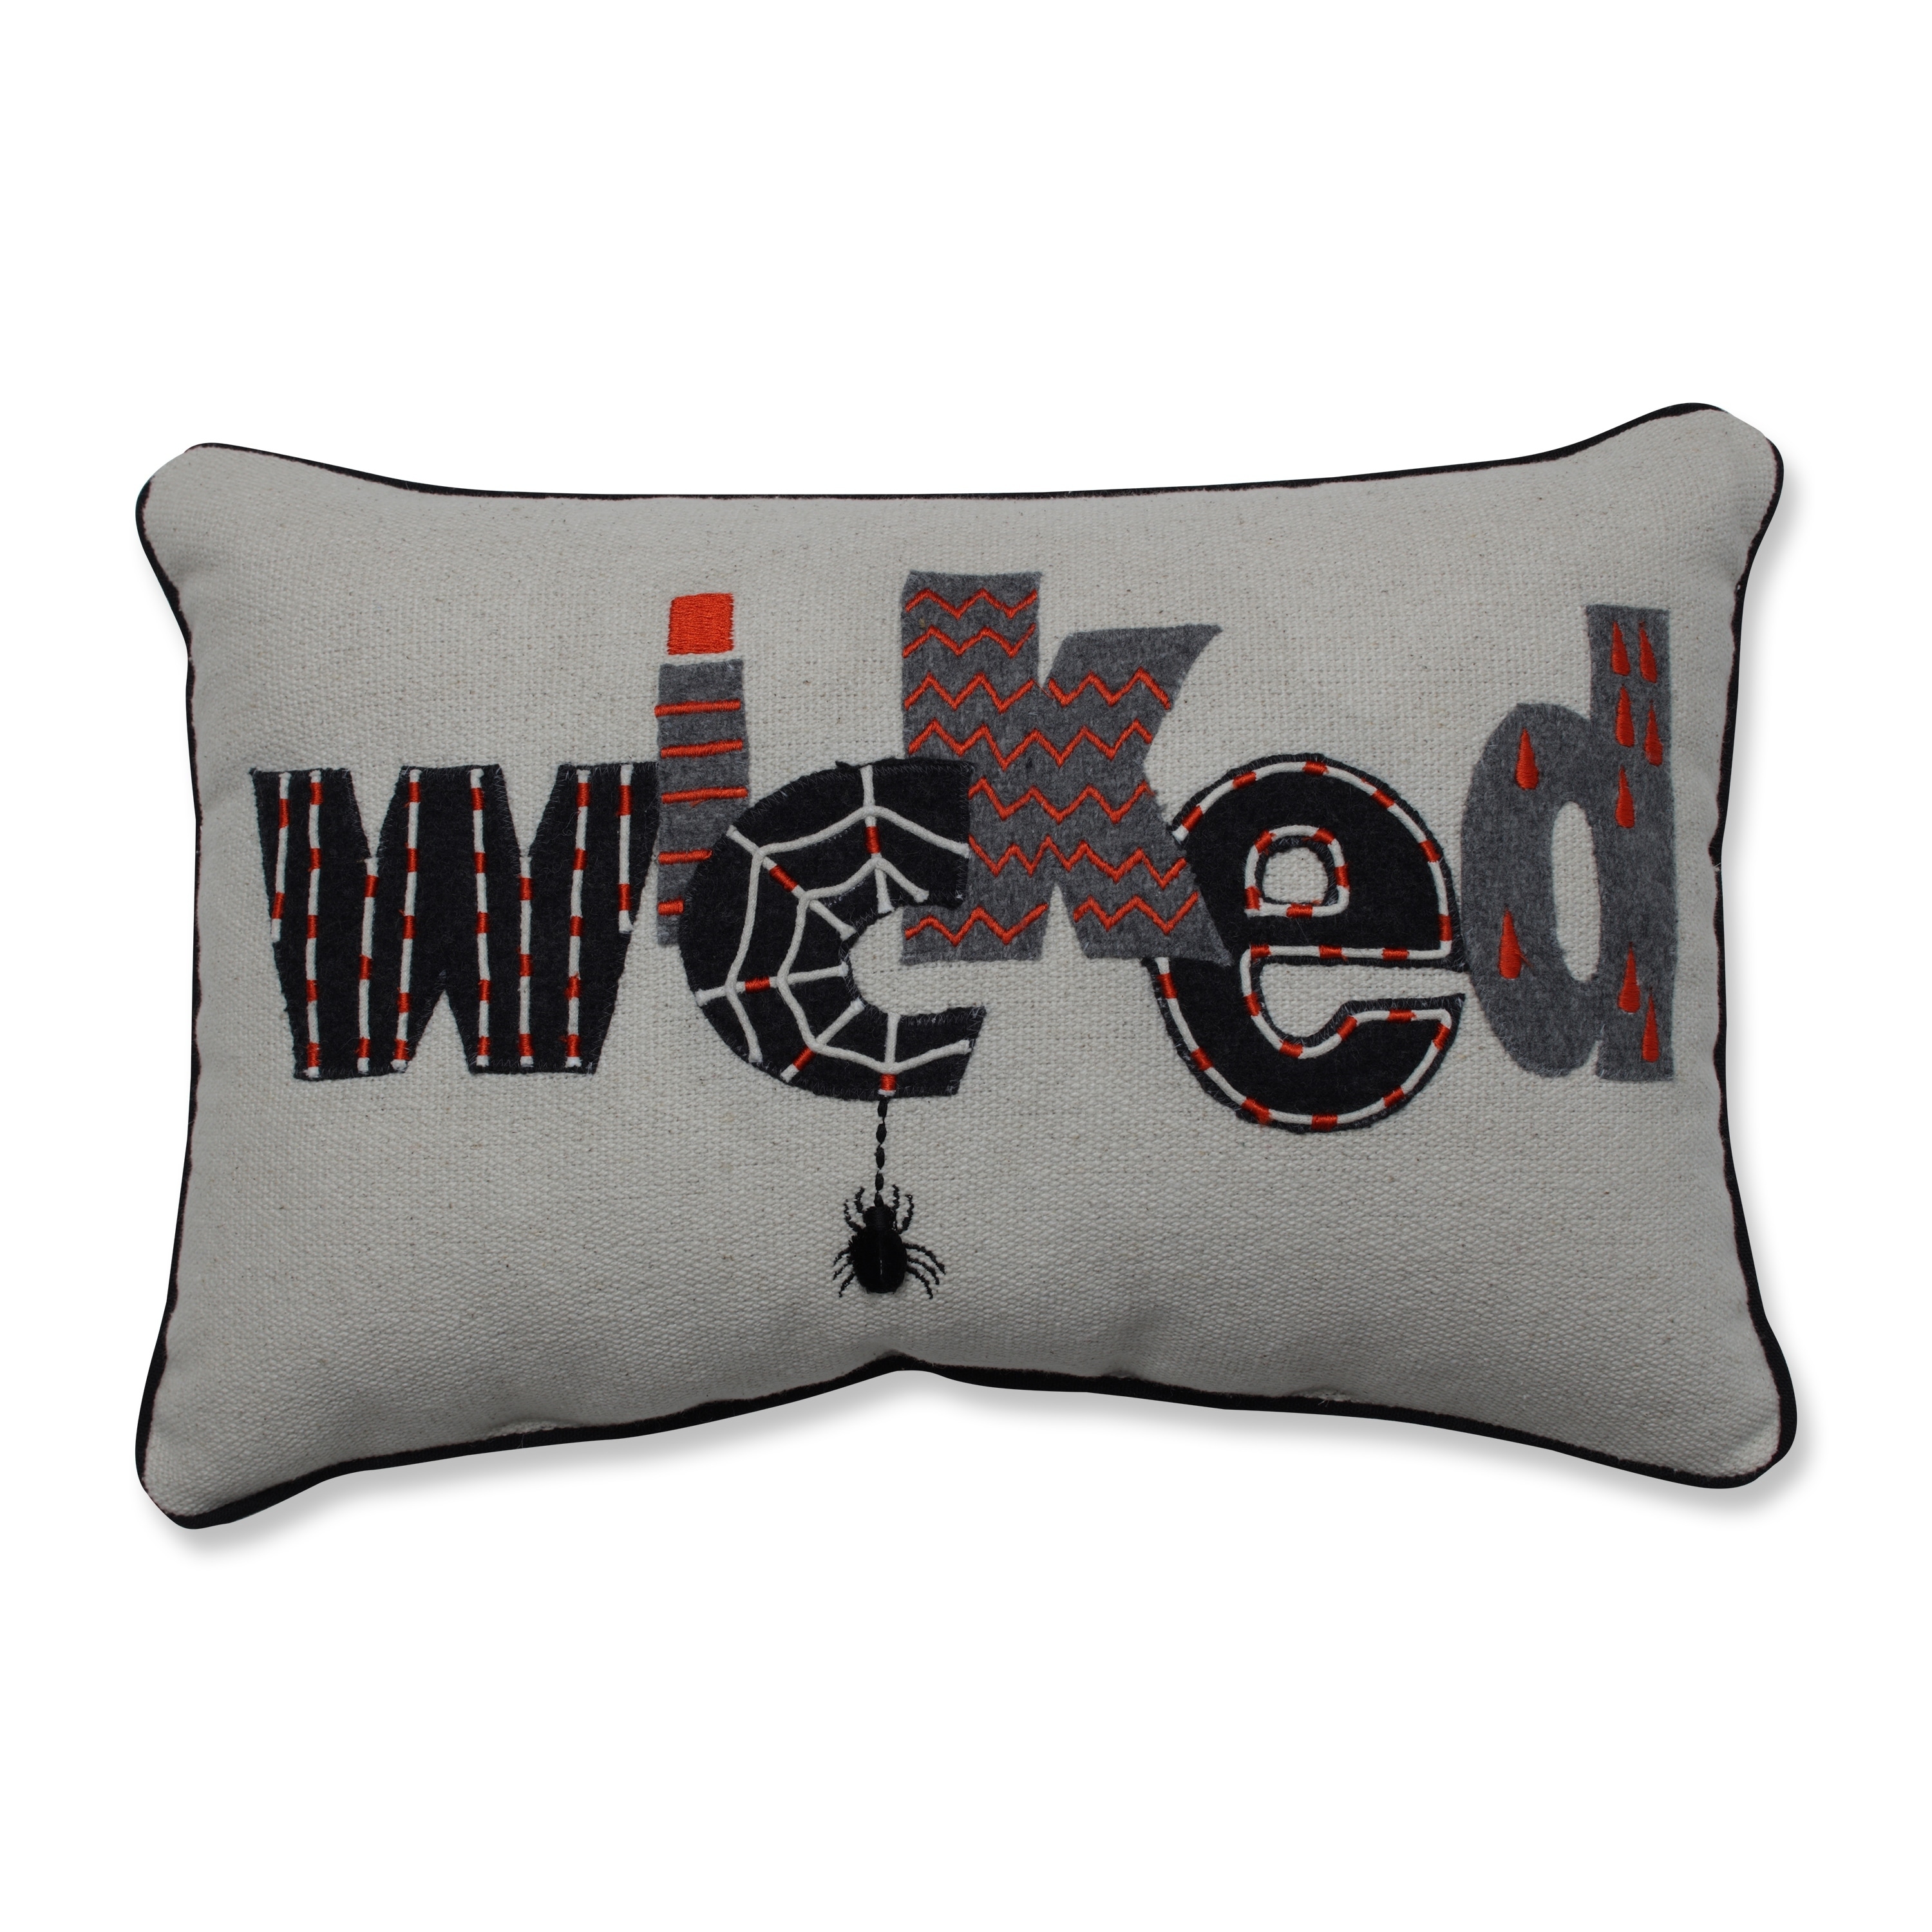 Pillow Perfect Wicked Black 12x18-inch Throw Pillow